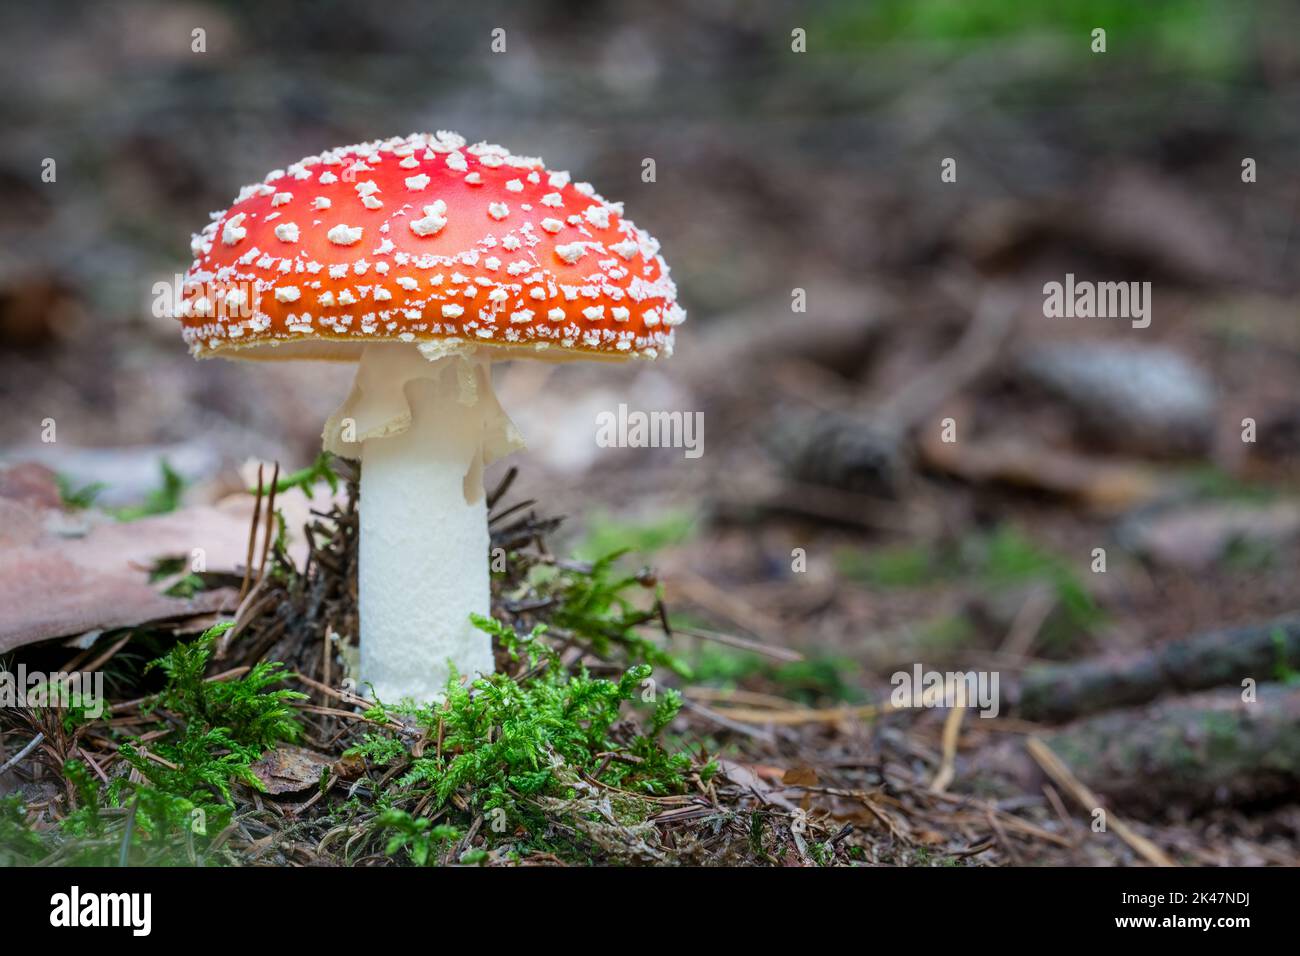 Beautiful fly agaric mushroom in green moss on blur natur forest background. Amanita muscaria. Closeup a toadstool with white warty patches on red cap. Stock Photo